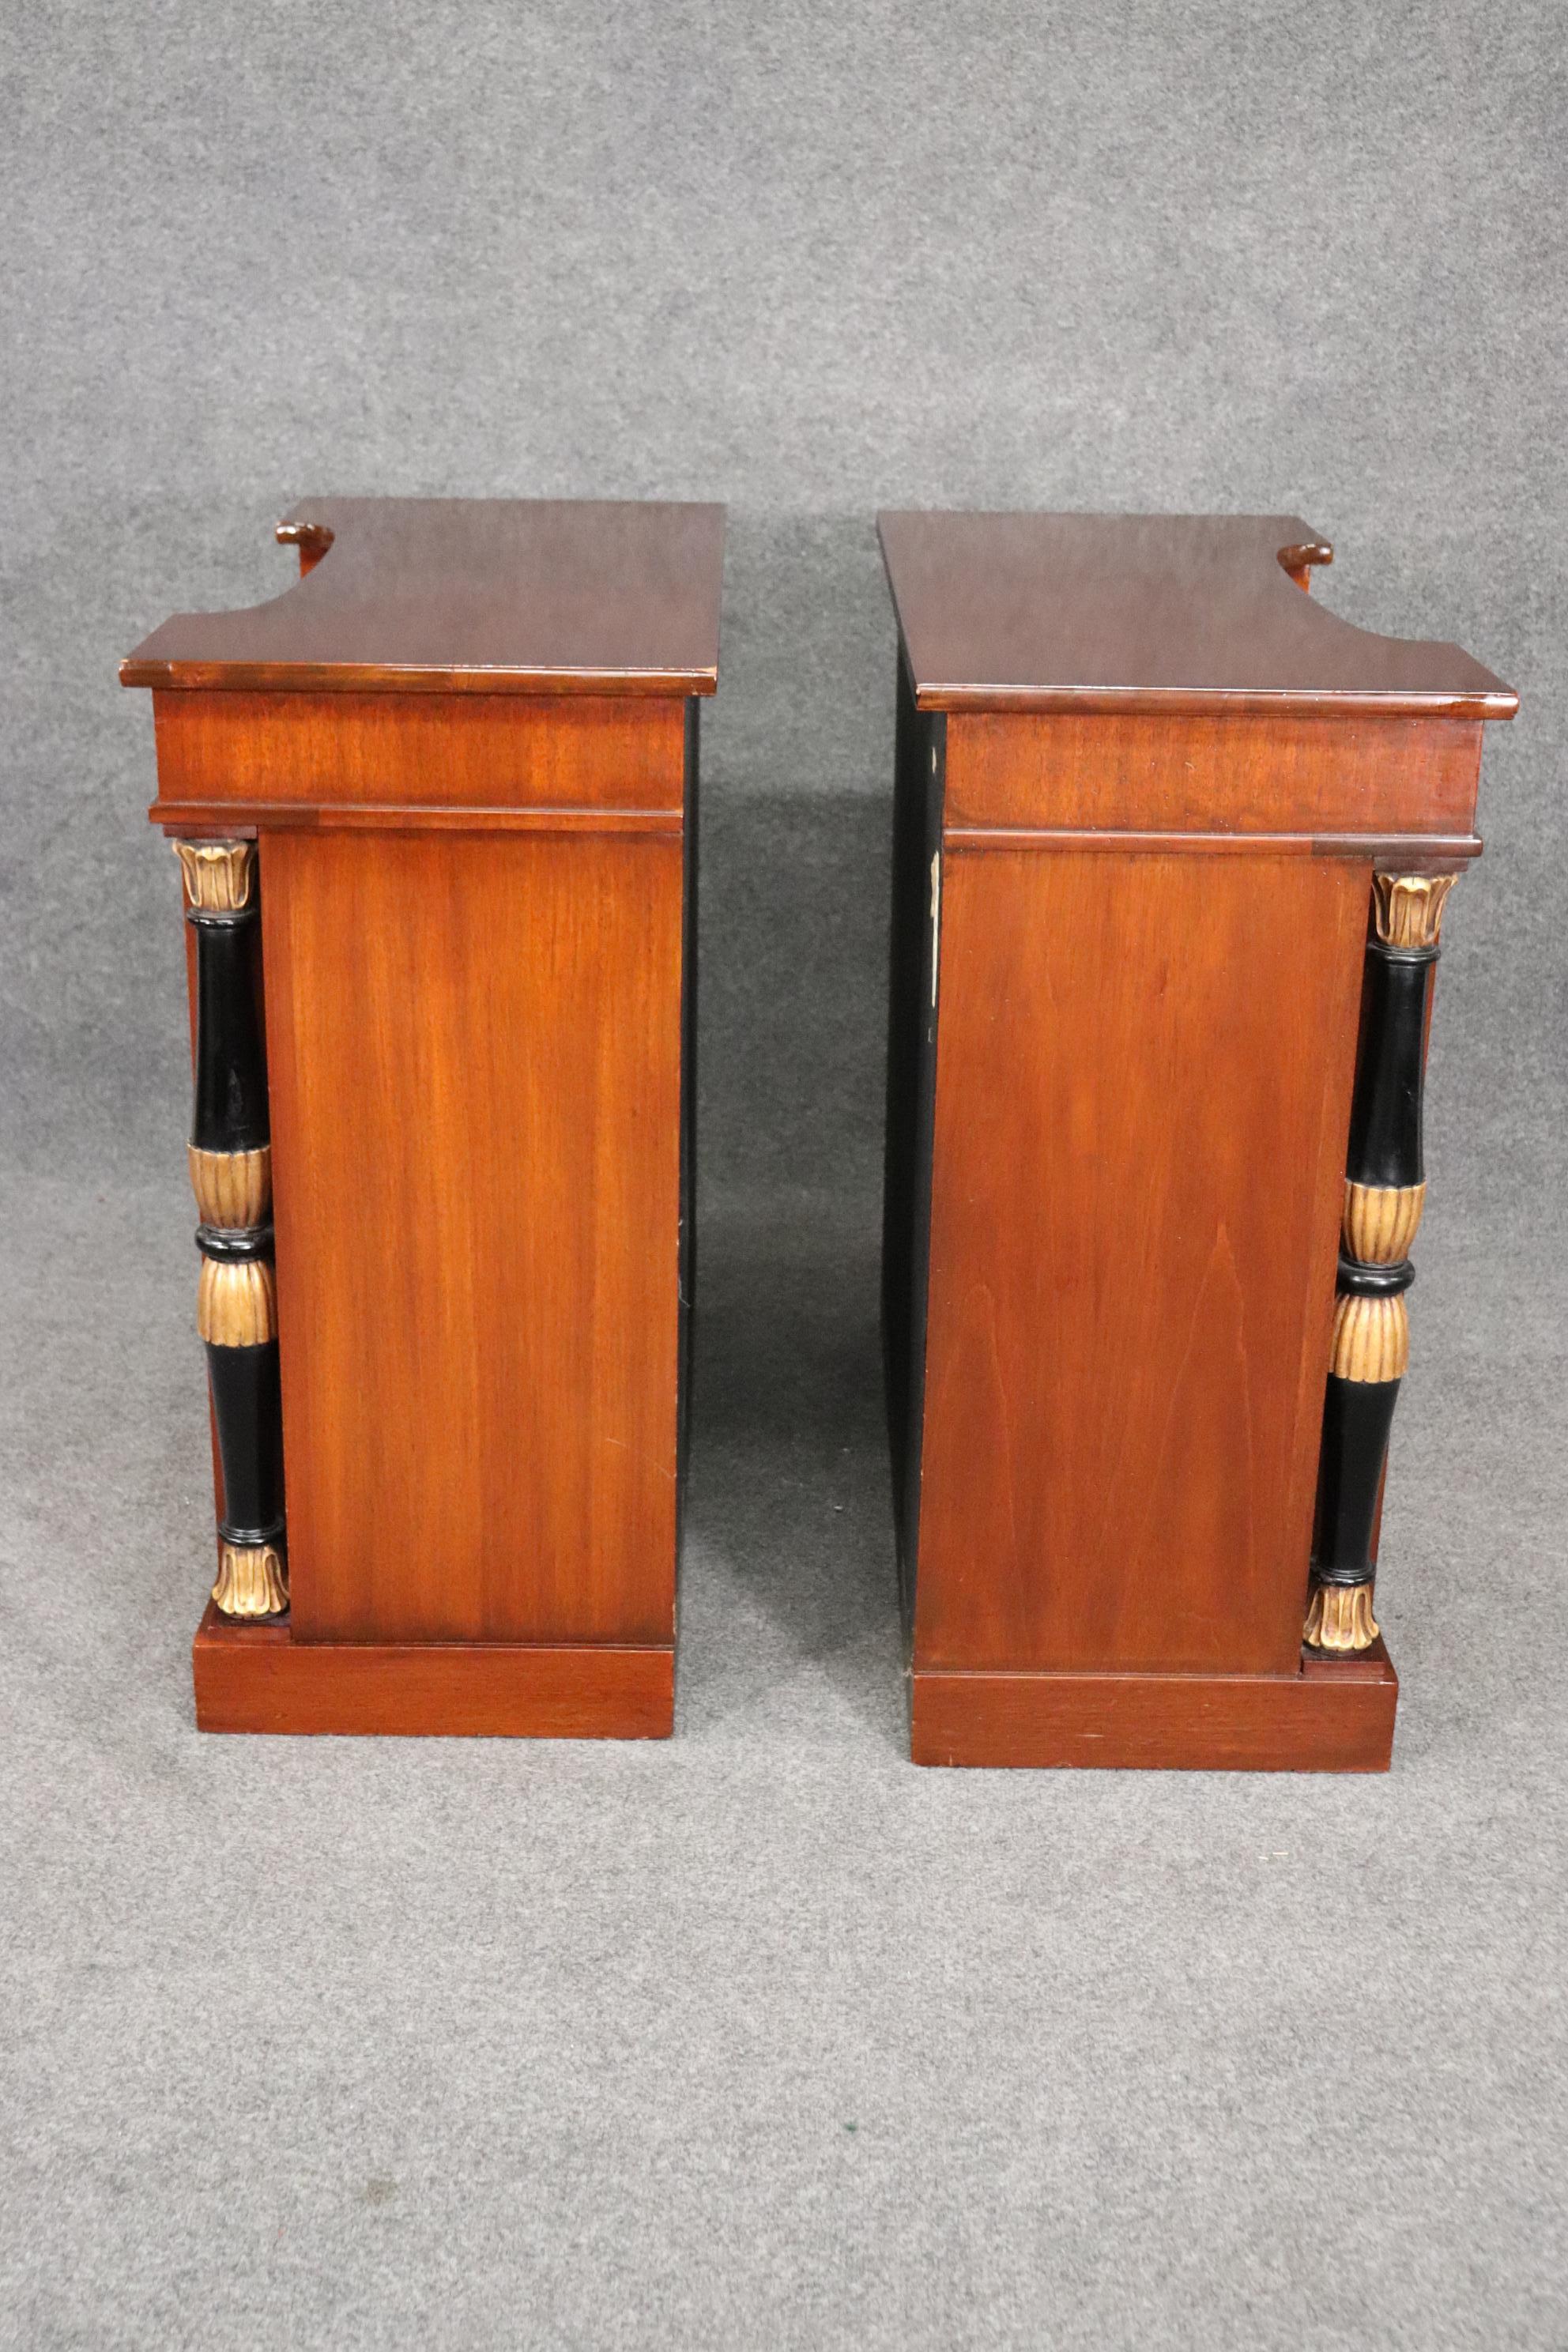 Rare Pair Brass Inlaid Mahogany English Regency Foyer Cabinets Commodes For Sale 2